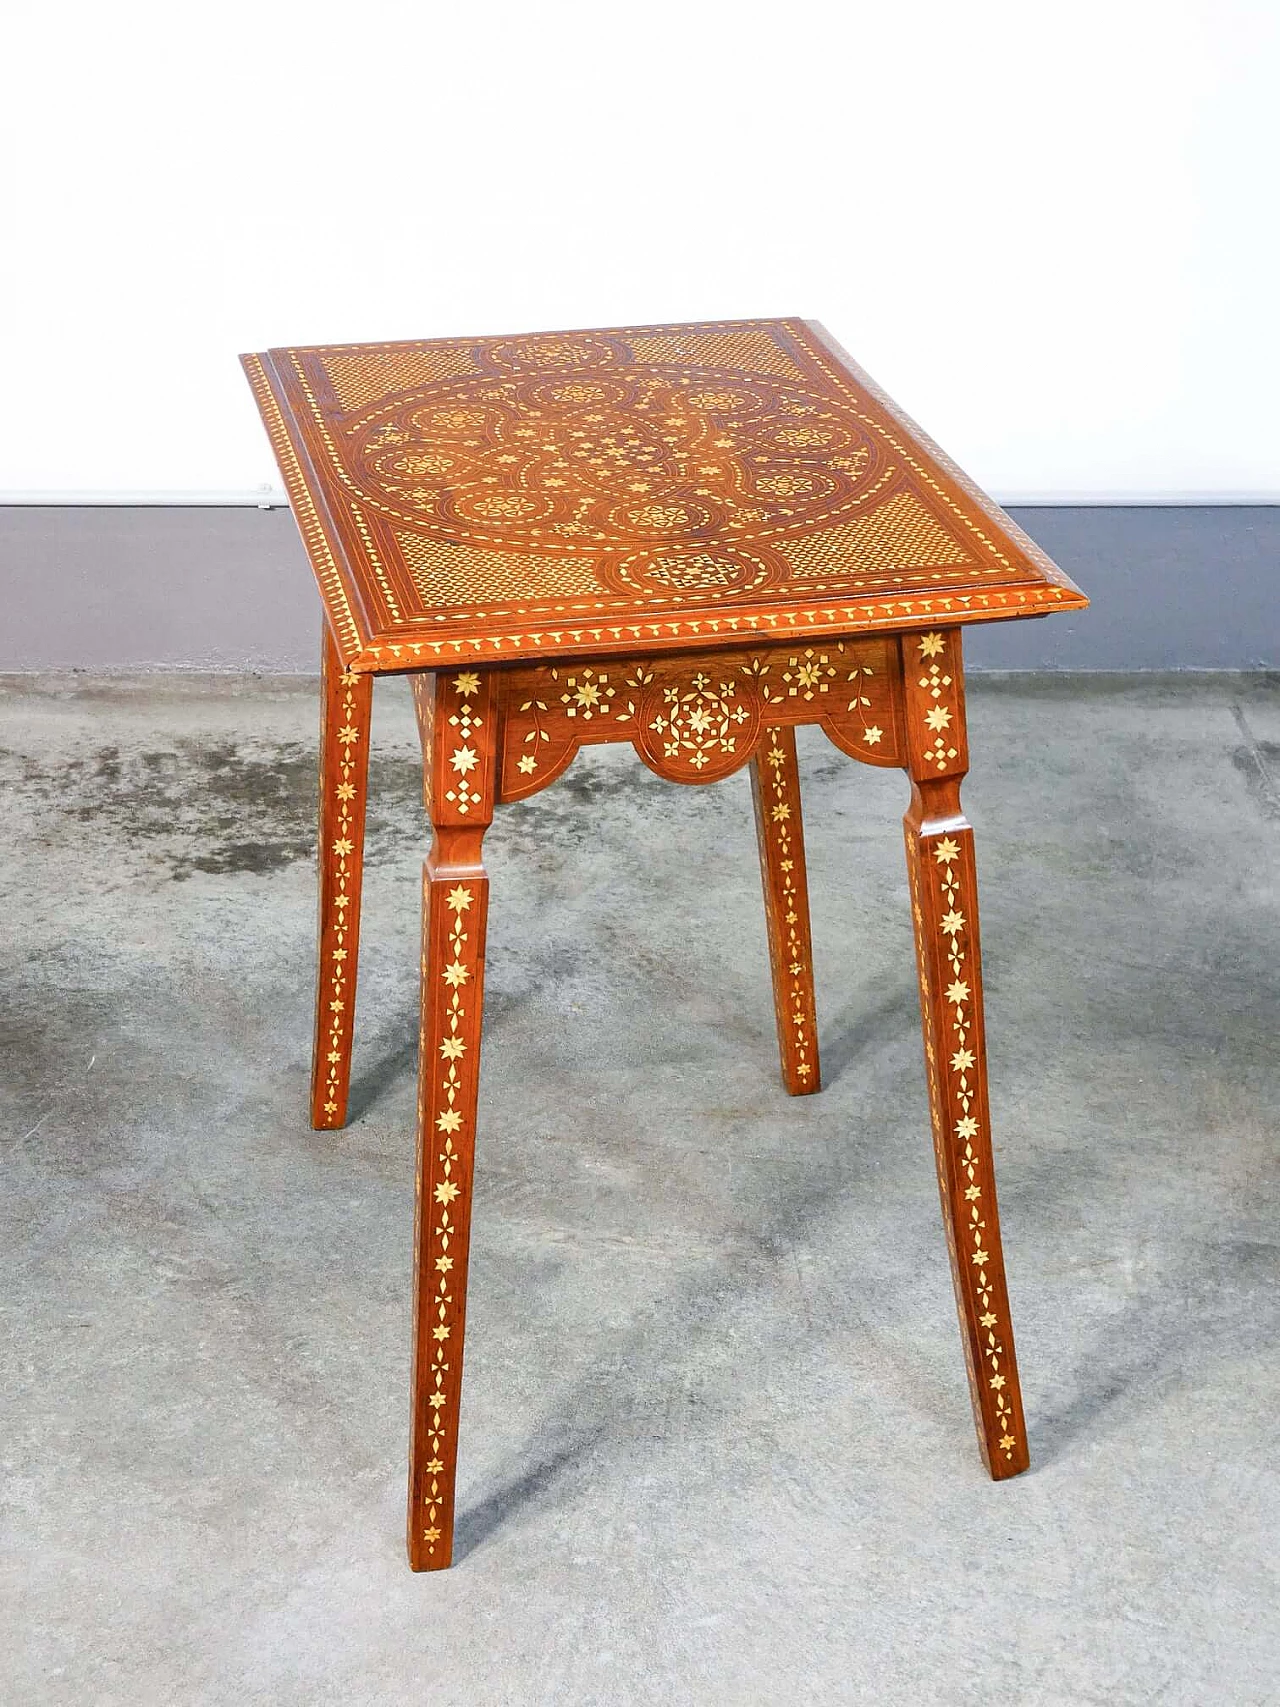 Carthusian-inlaid wooden coffee table in the style of Adriano Brambilla, late 19th century 7